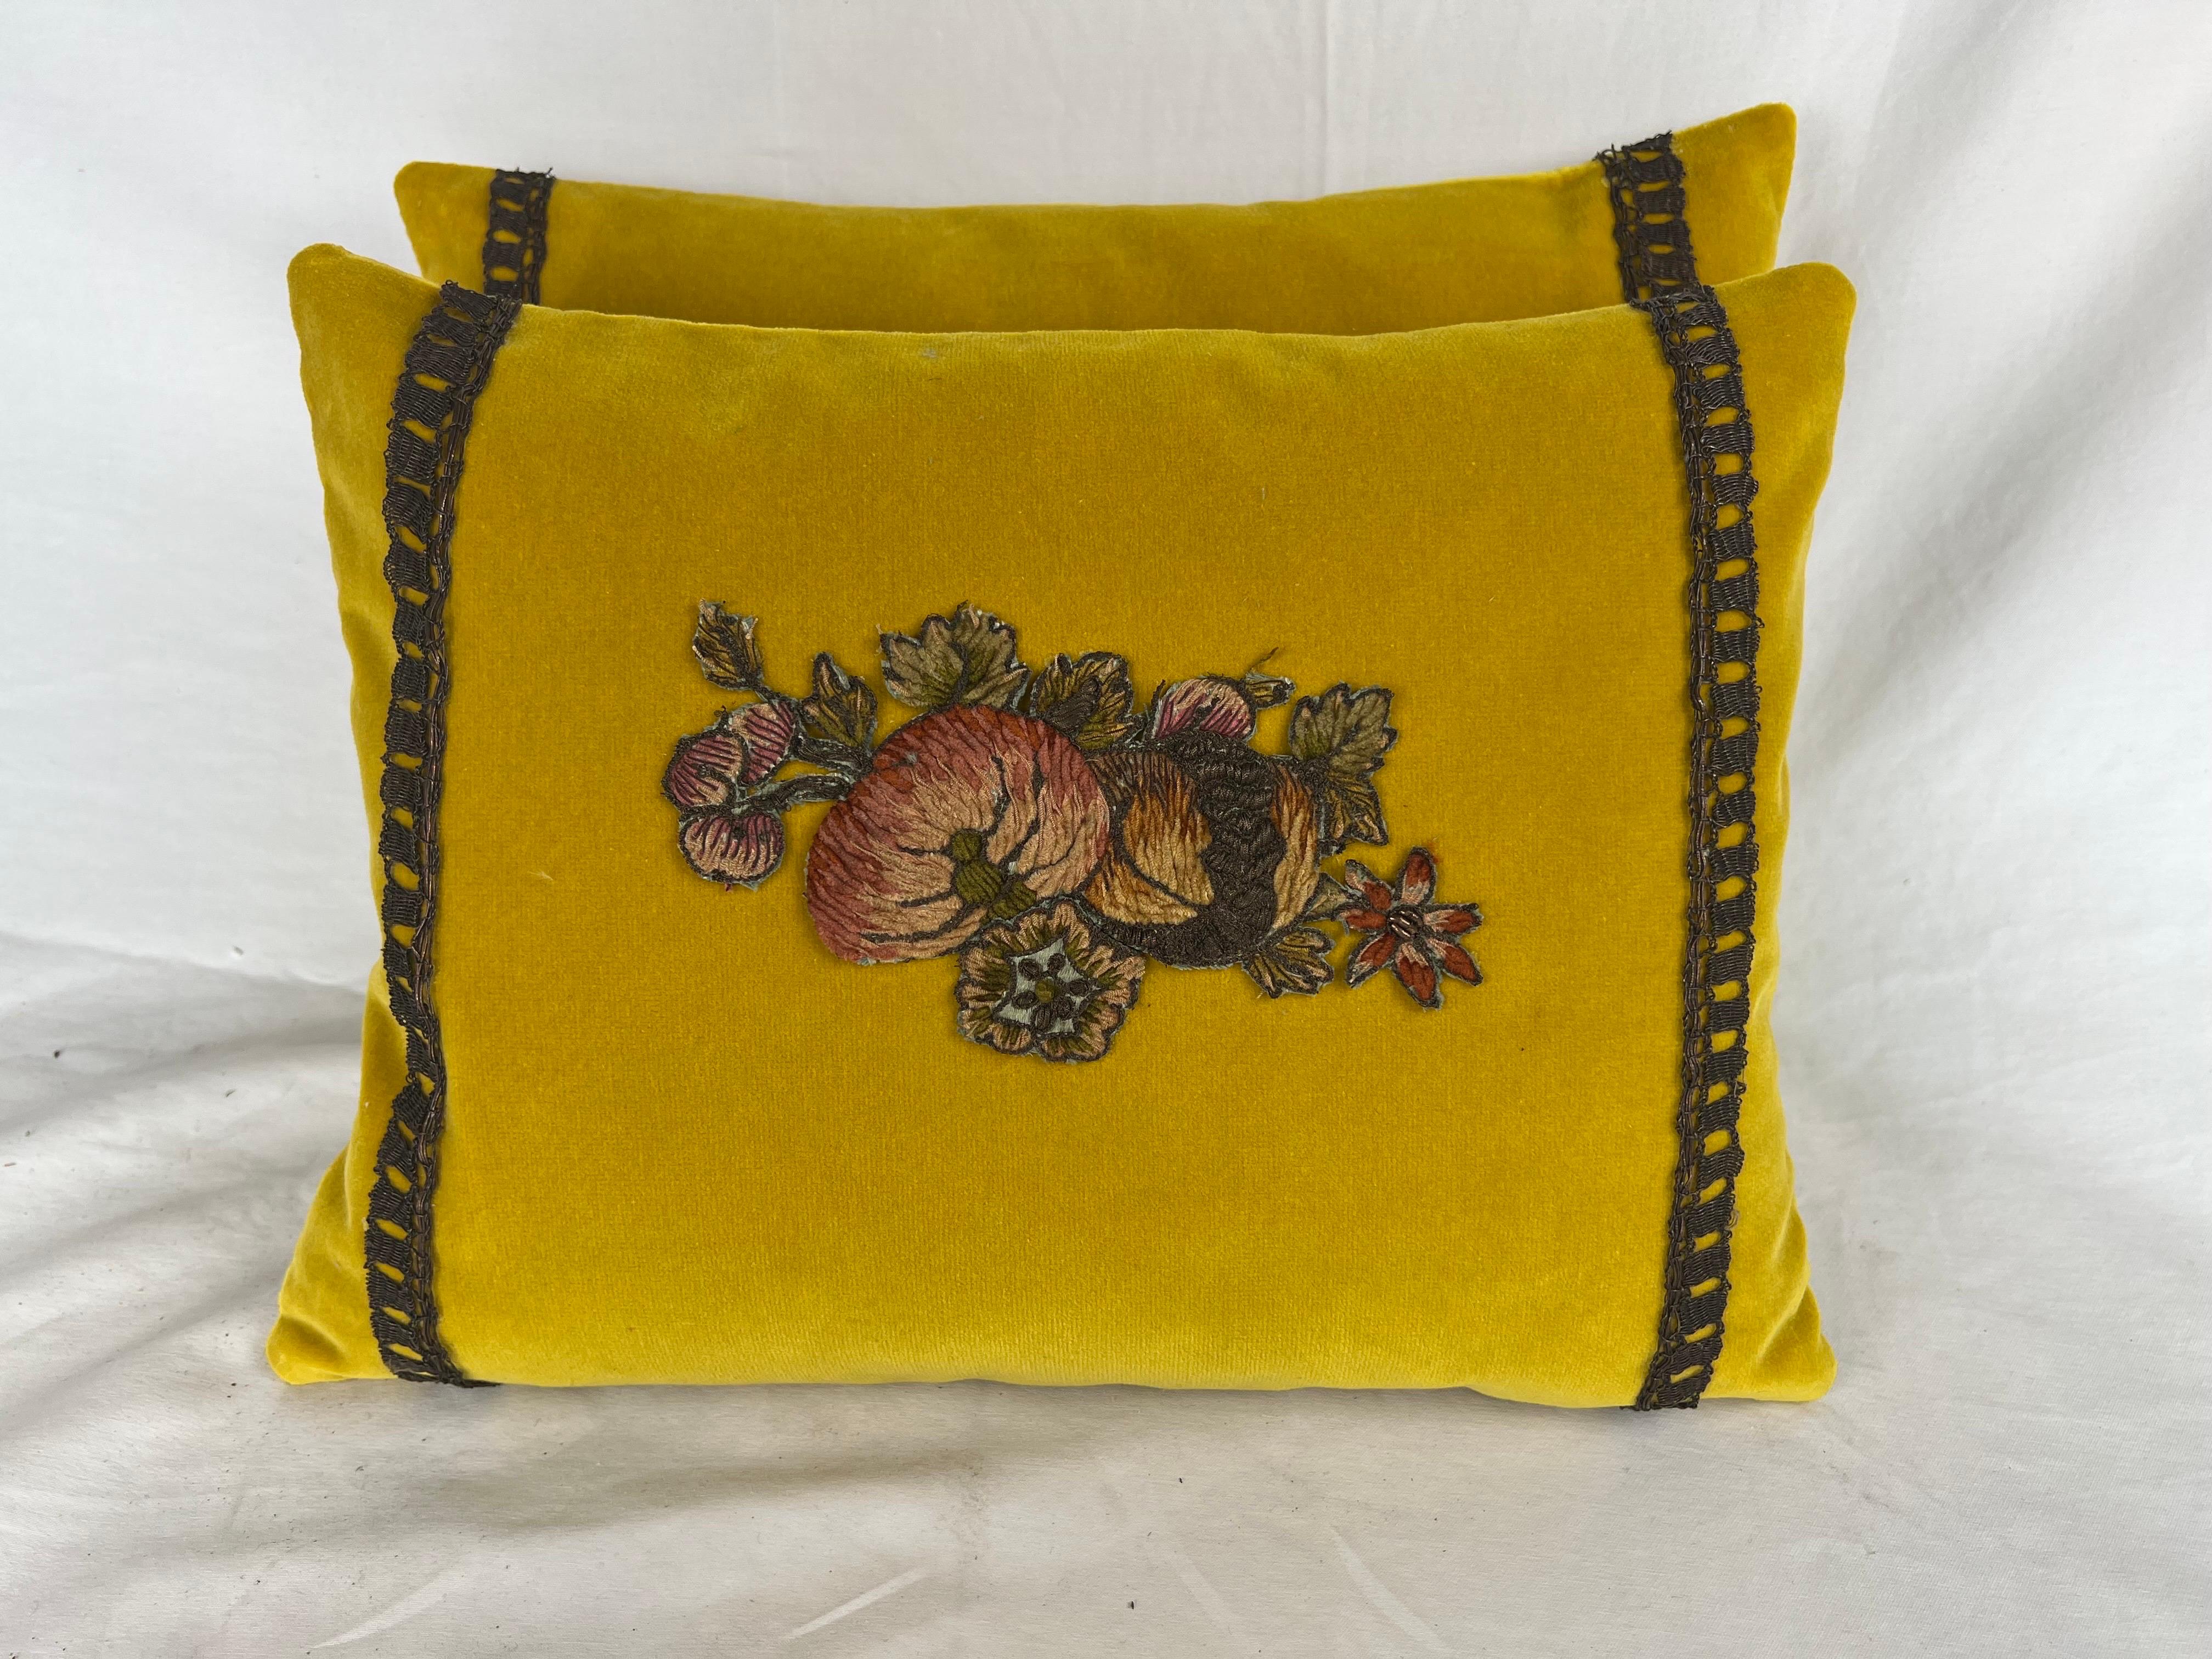 Pair of custom pillows made with 19th century French metallic & chenille floral appliques. The appliques were placed on a vibrant yellow mohair and finished with 19th century metallic handmade lace. Down inserts, zipper closures.